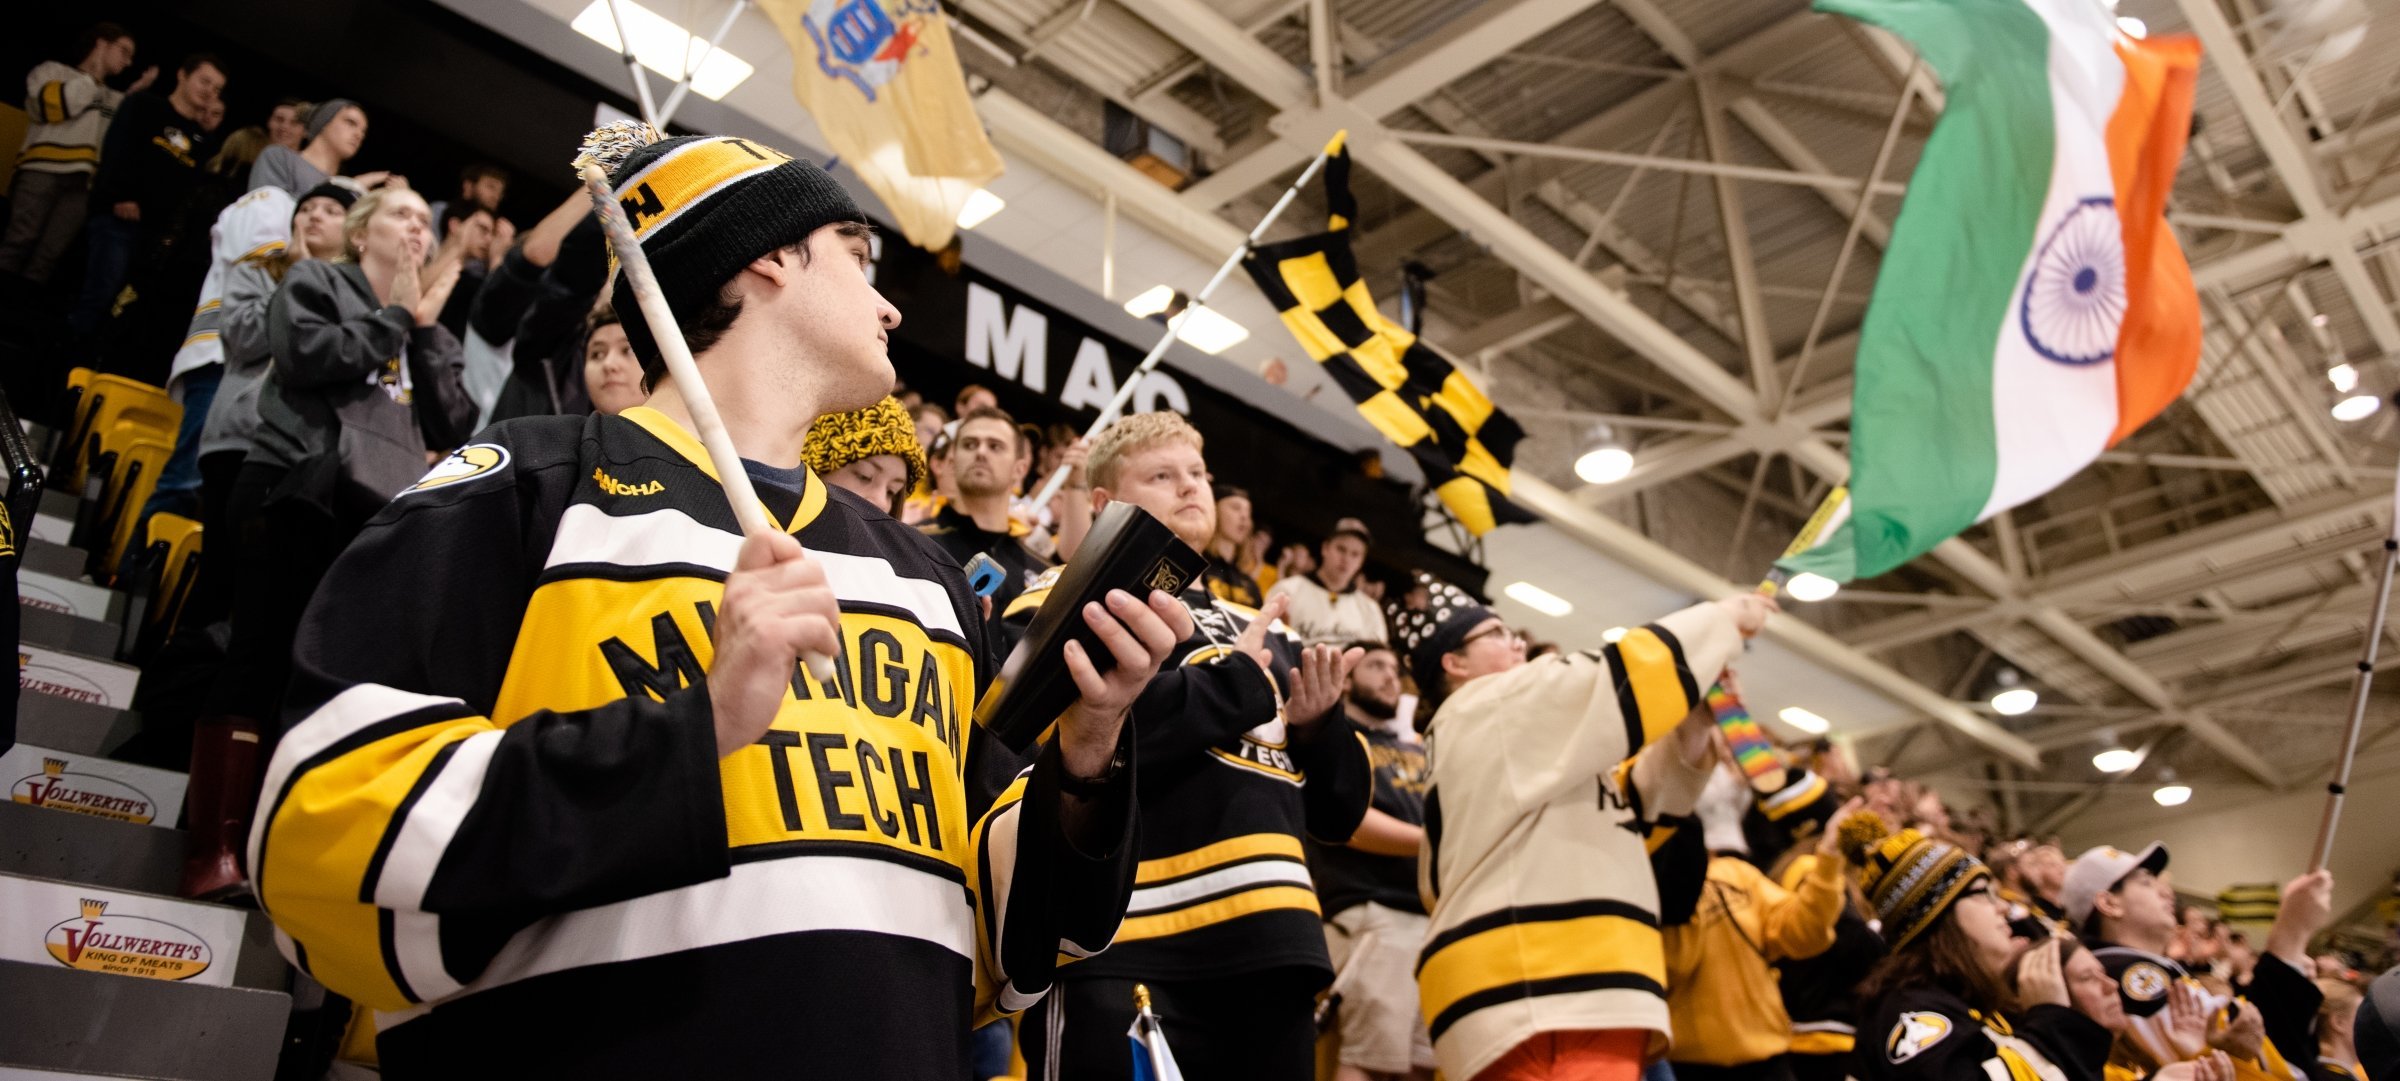 A crowd cheering for at a Michigan Tech Hockey game